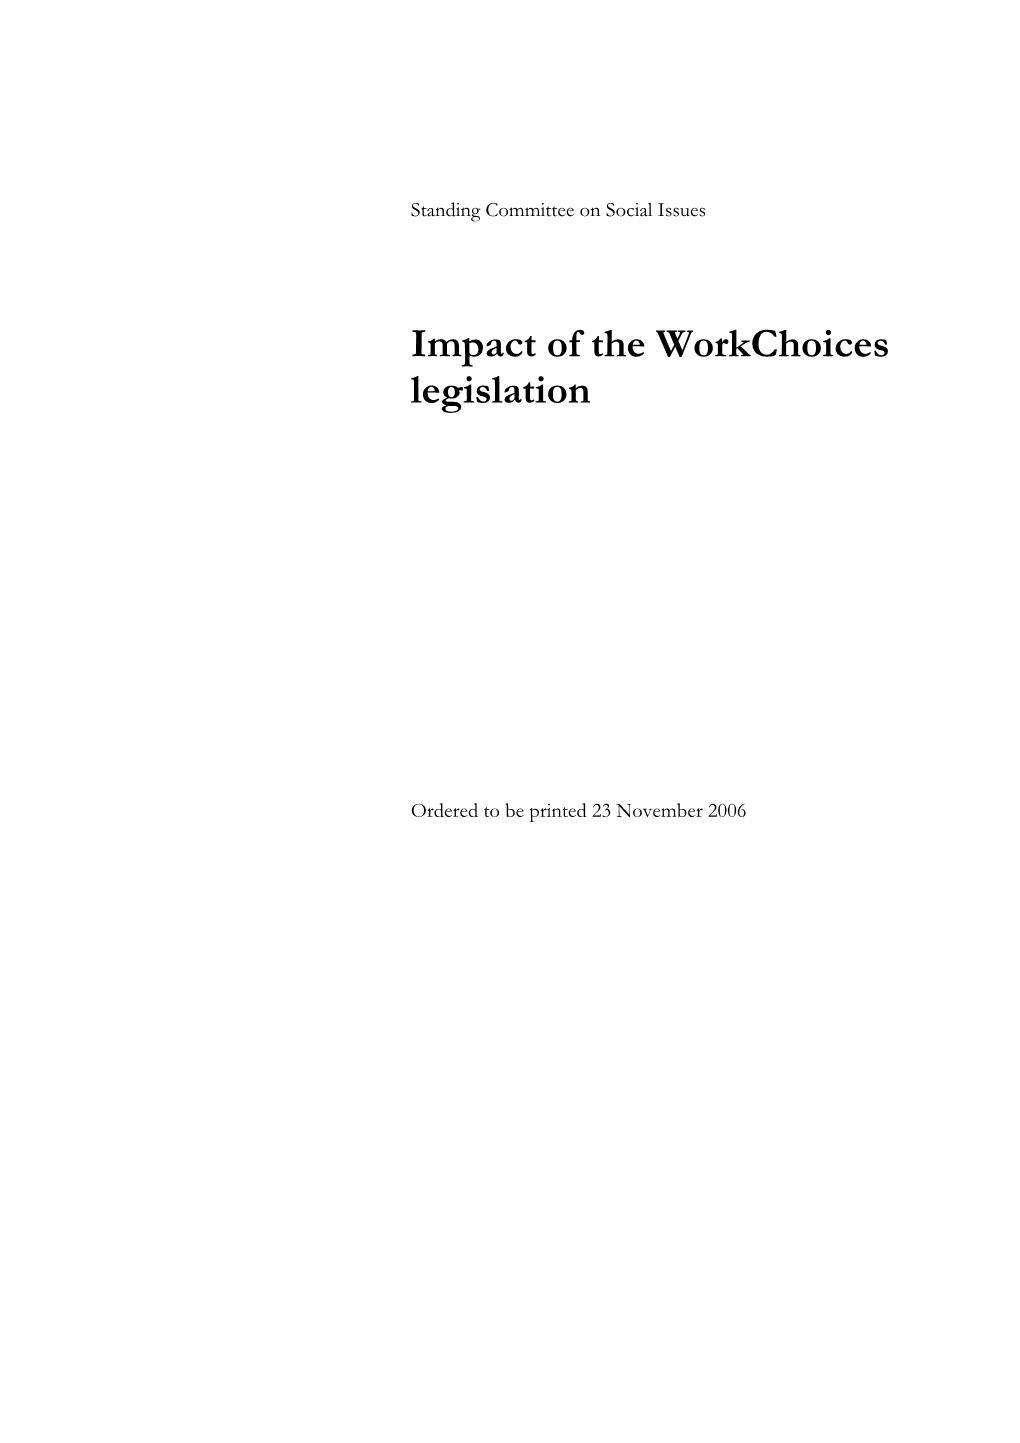 Impact of the Workchoices Legislation